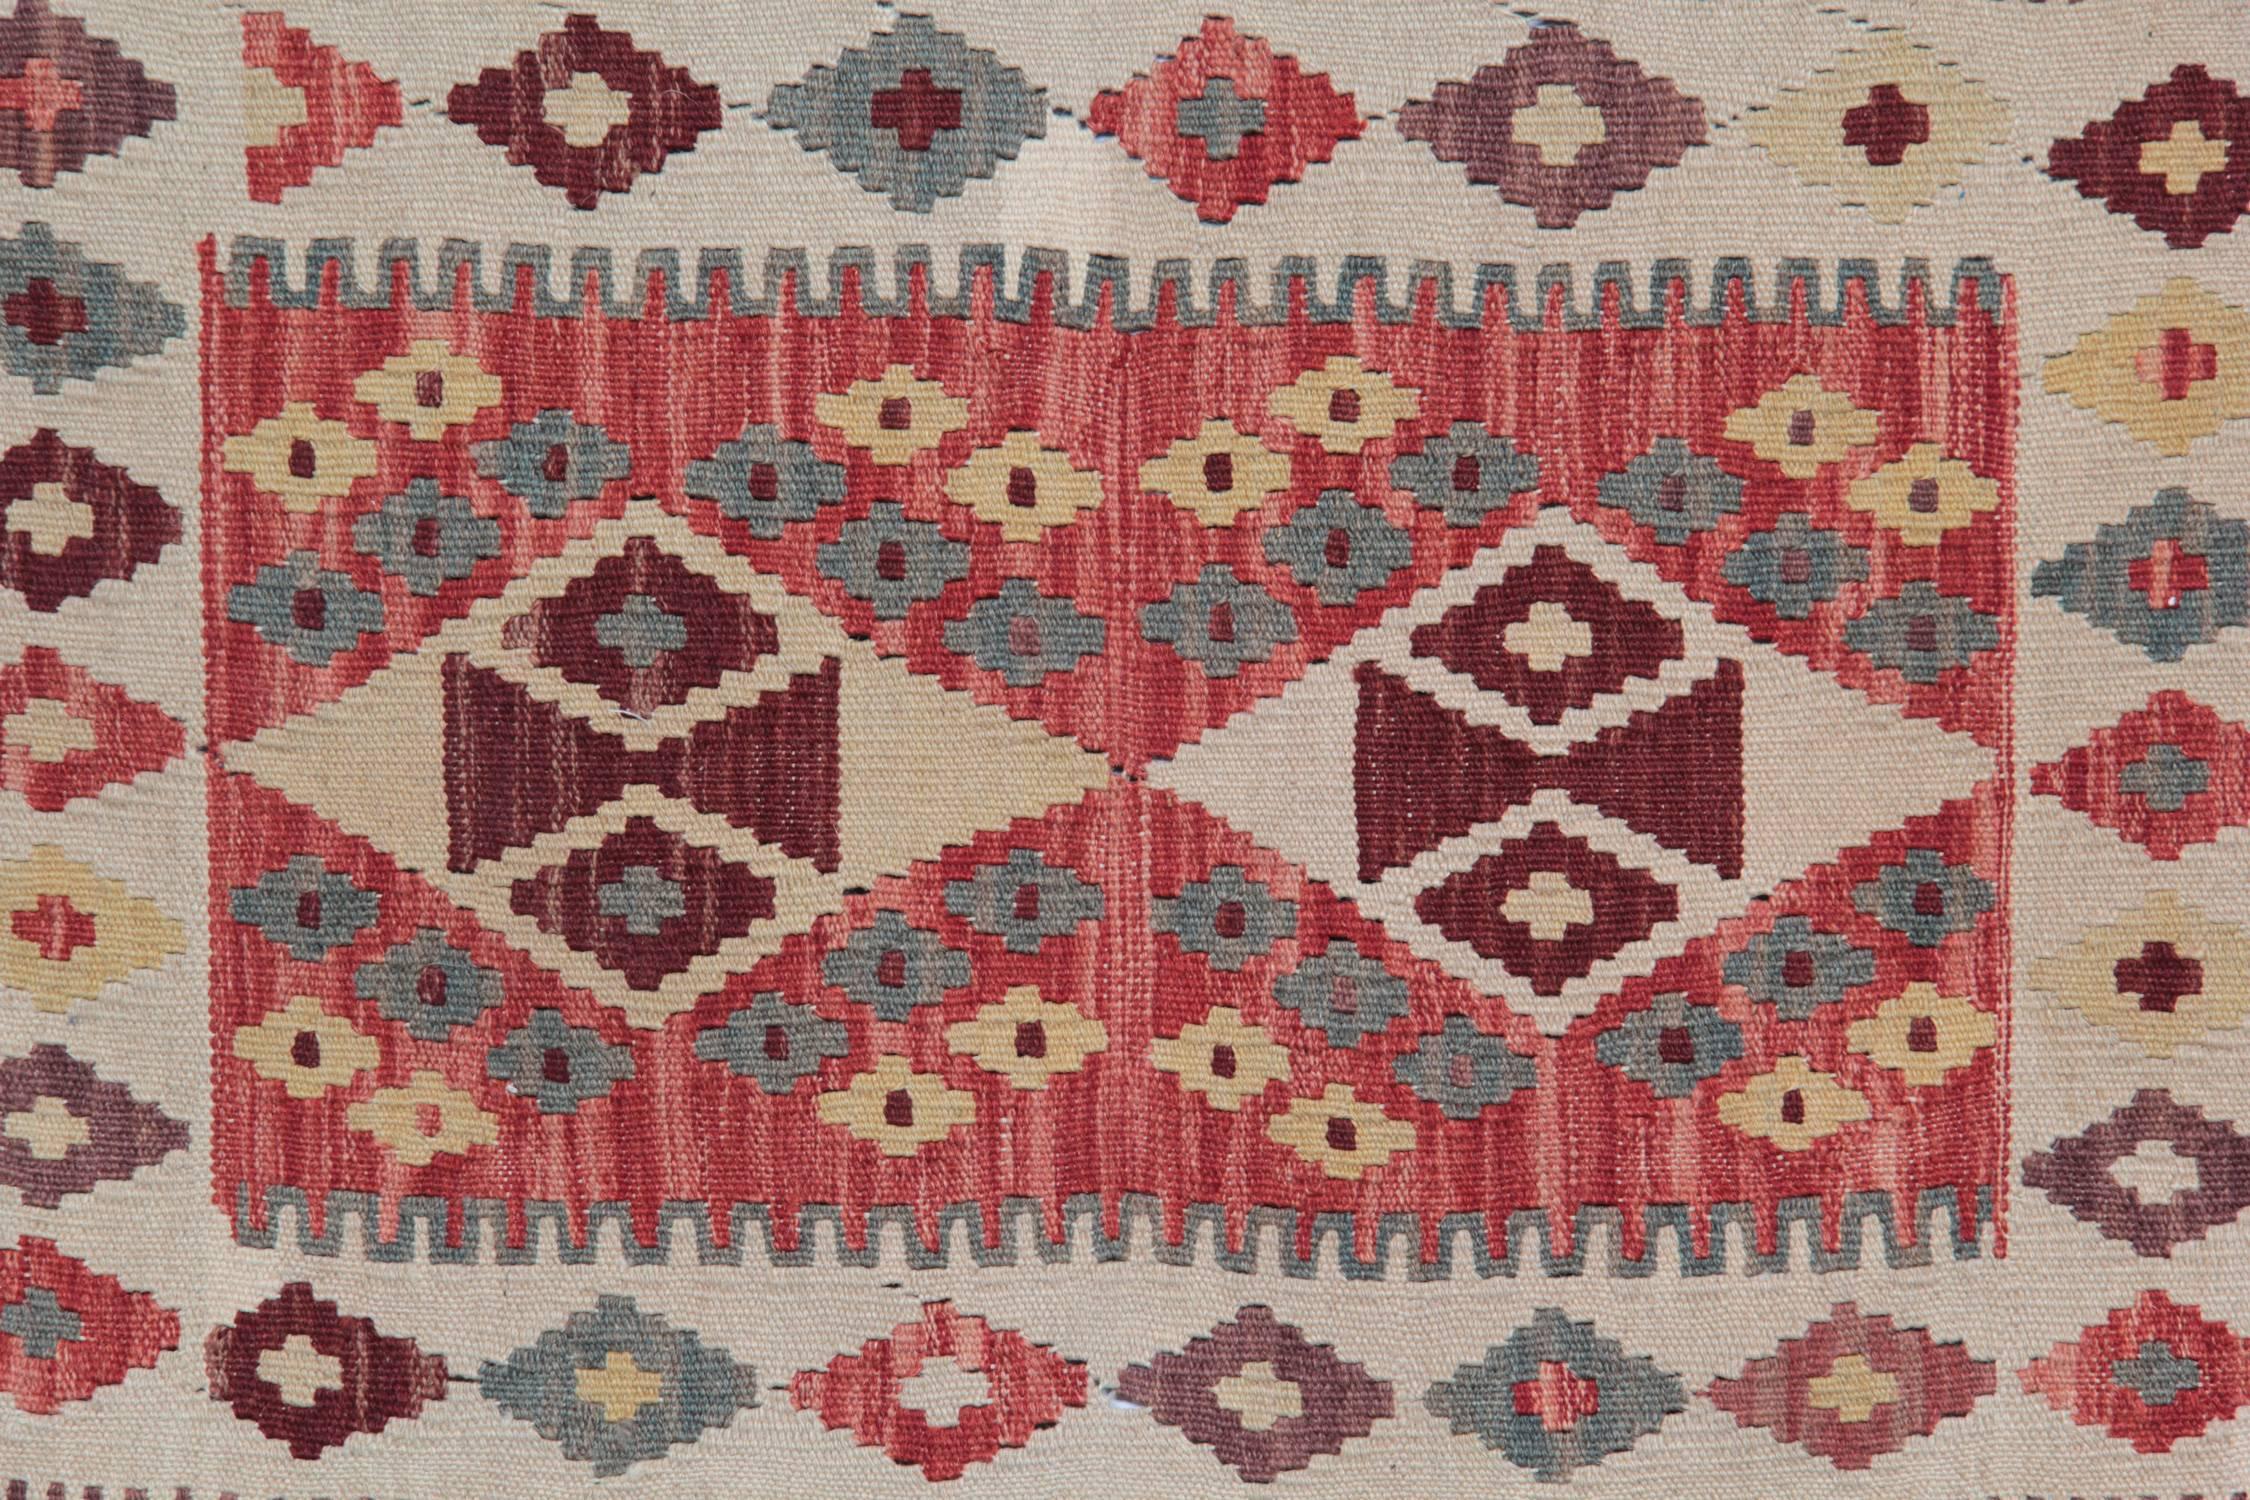 This colorful carpet rug is woven by very skilled weavers in Afghanistan, who used the highest quality wool and cotton. The flat-weave rug has orange, green, ivory, pink and red colors. The white background of this geometric rug has the same